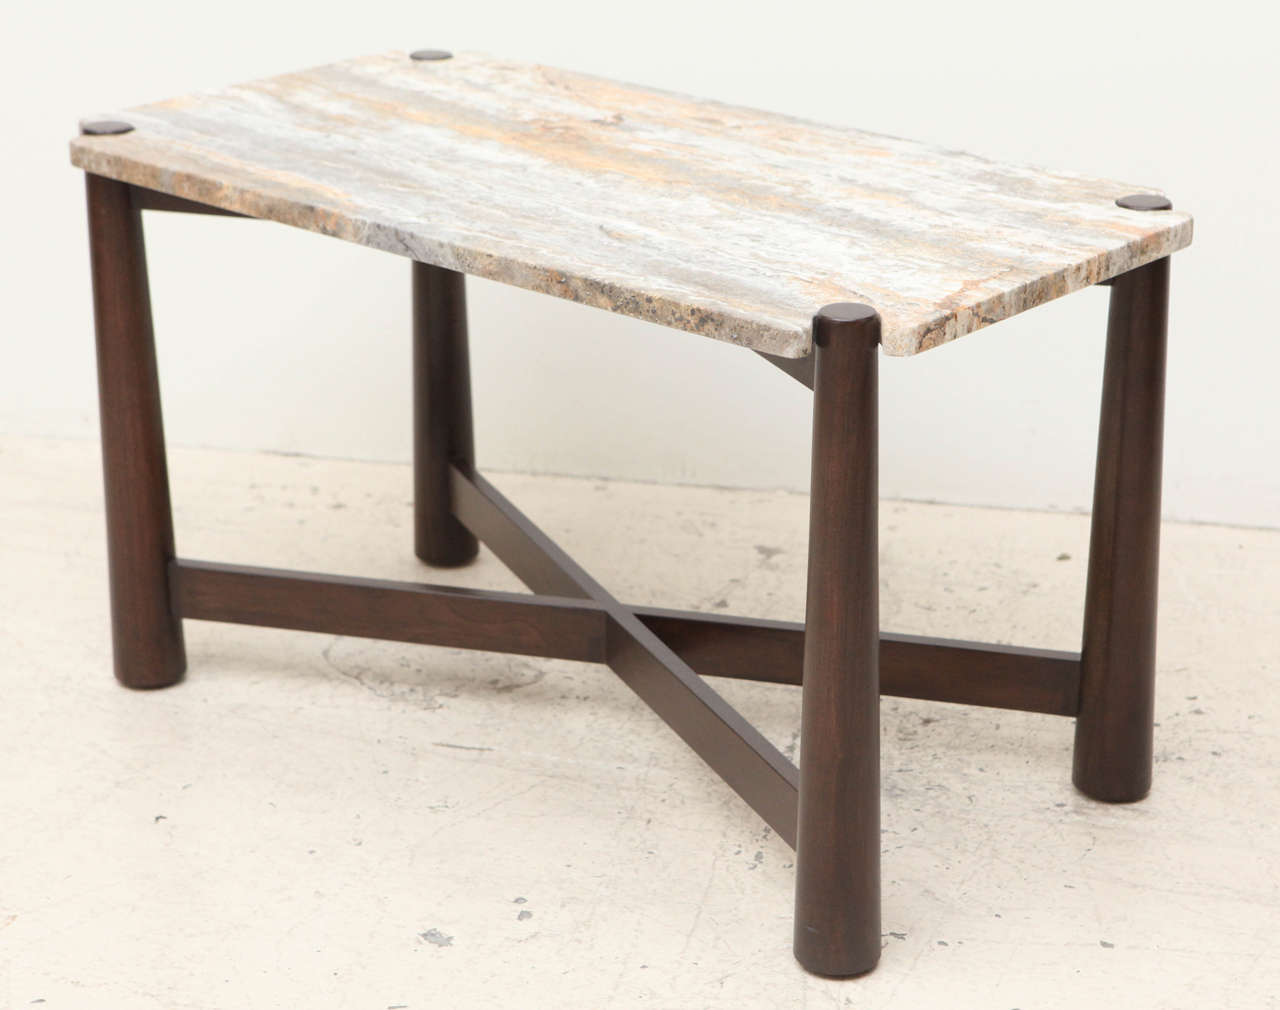 The Bronson side table features a stone top with notched corners that rests atop a detailed American walnut or white oak base.

The Lawson-Fenning Collection is designed and handmade in Los Angeles, California.

Contact us to find out which finishes